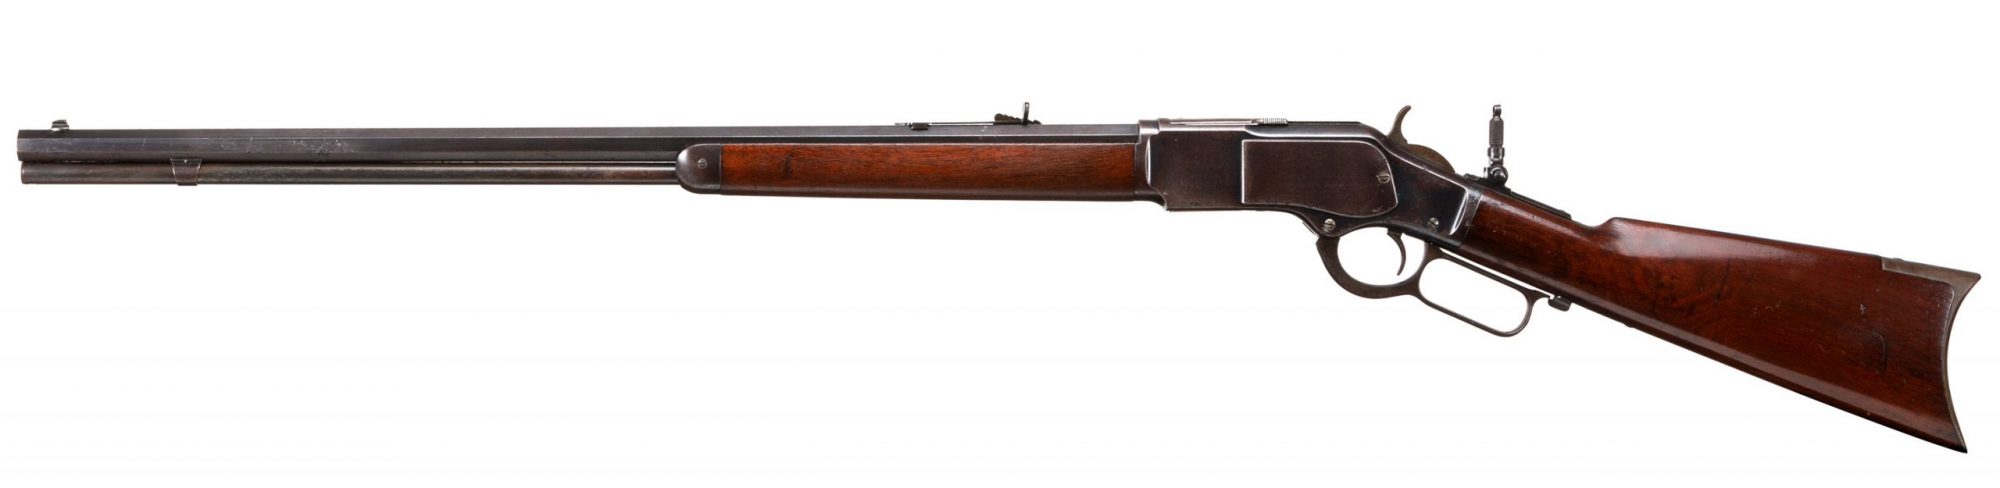 Photo of an antique Winchester Model 1873, for sale through Turnbull Restoration